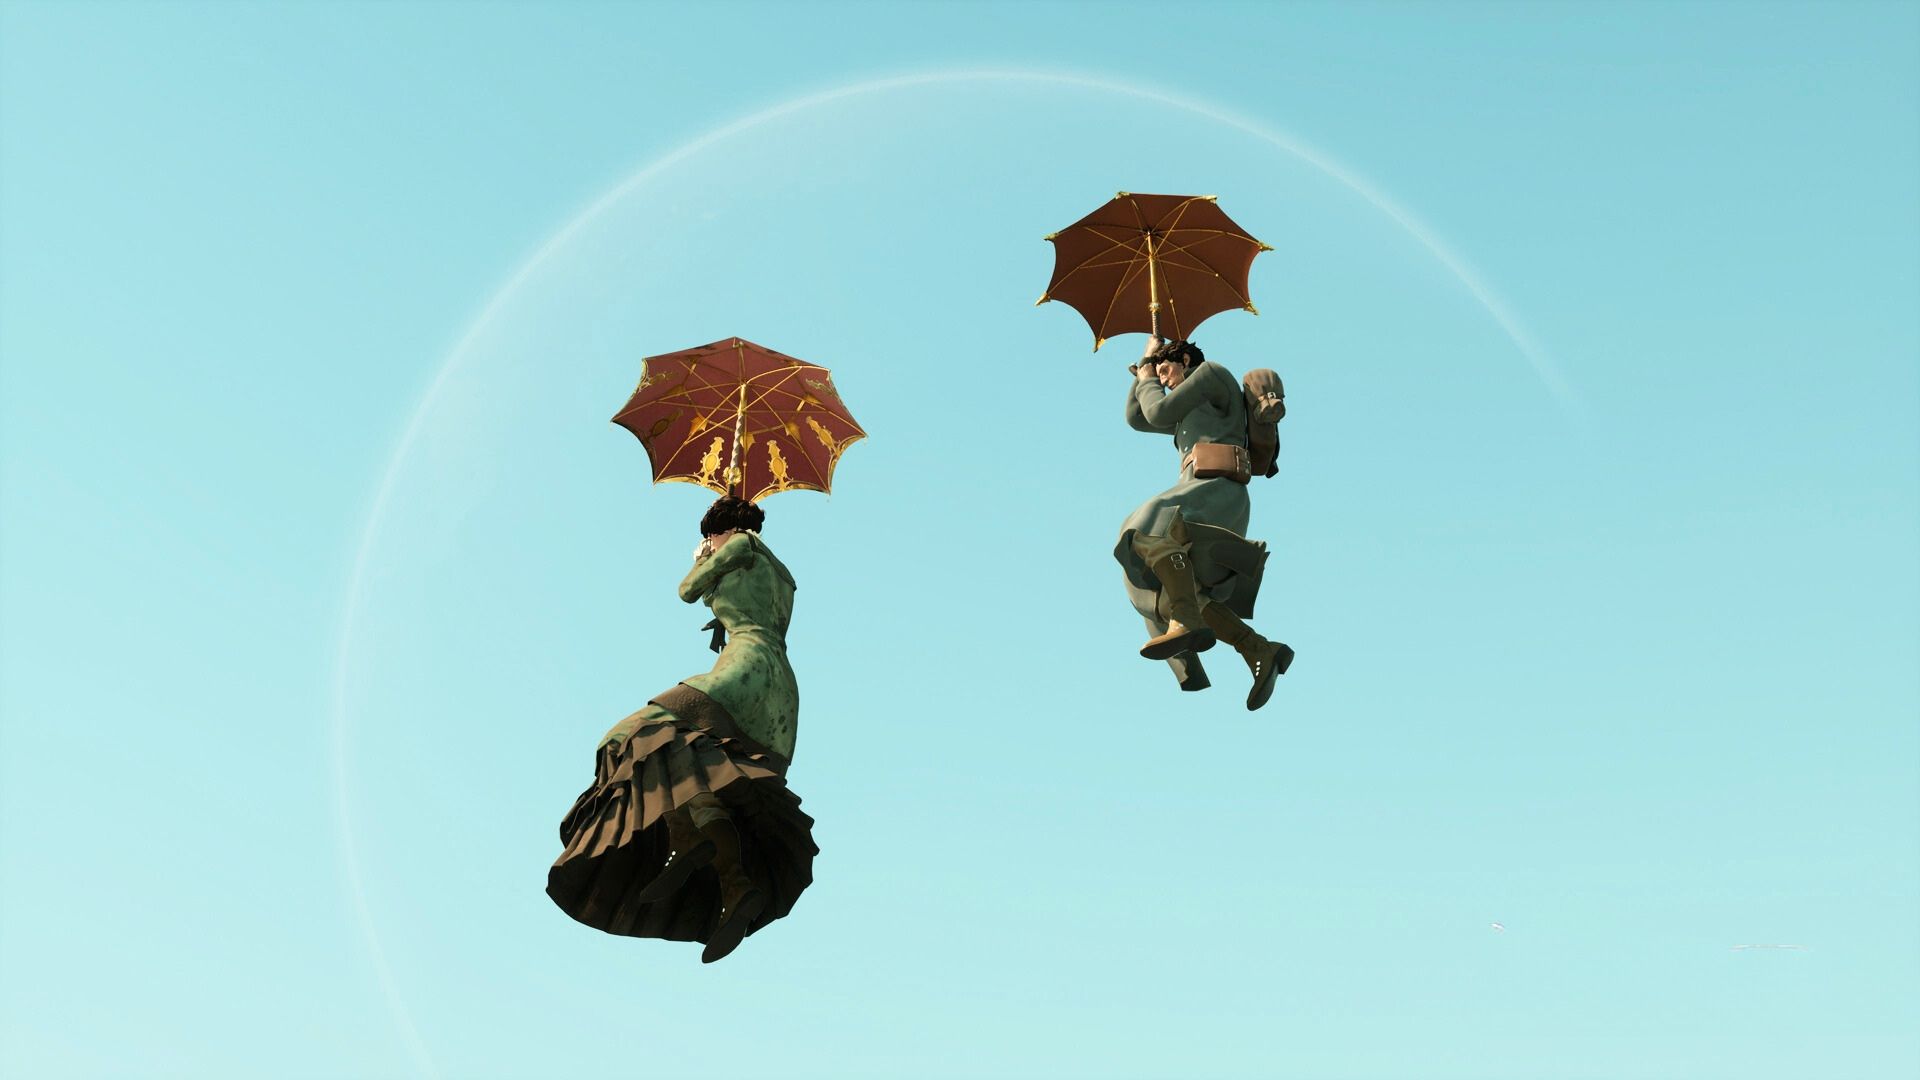 Two Nightingale characters gliding on umbrellas